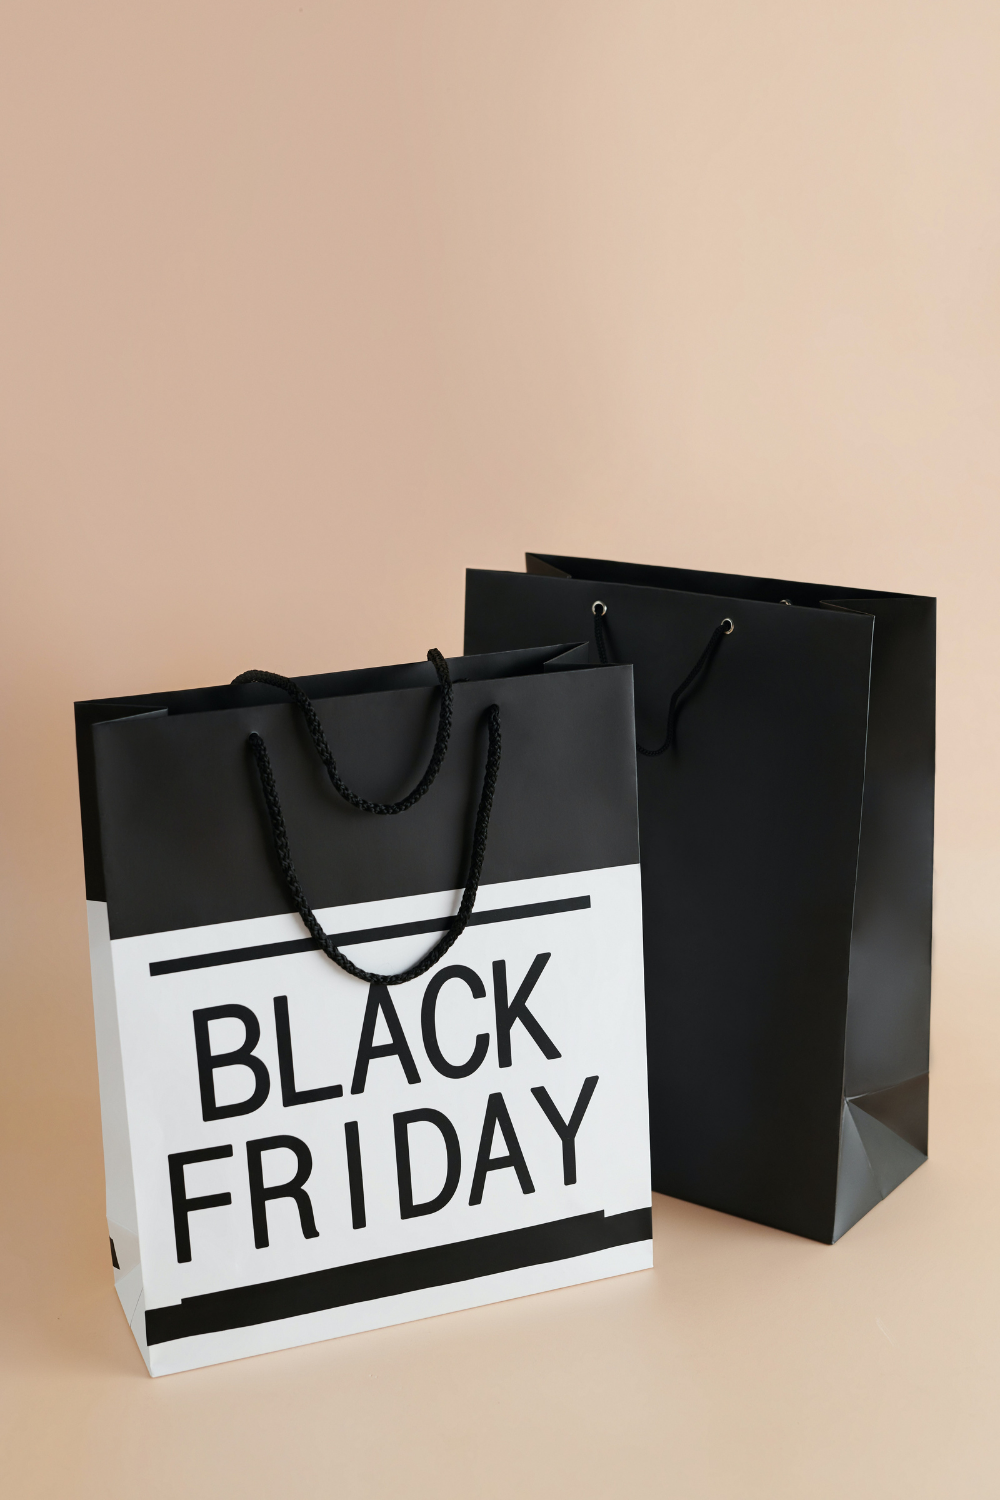 Black Friday is Officially Here!